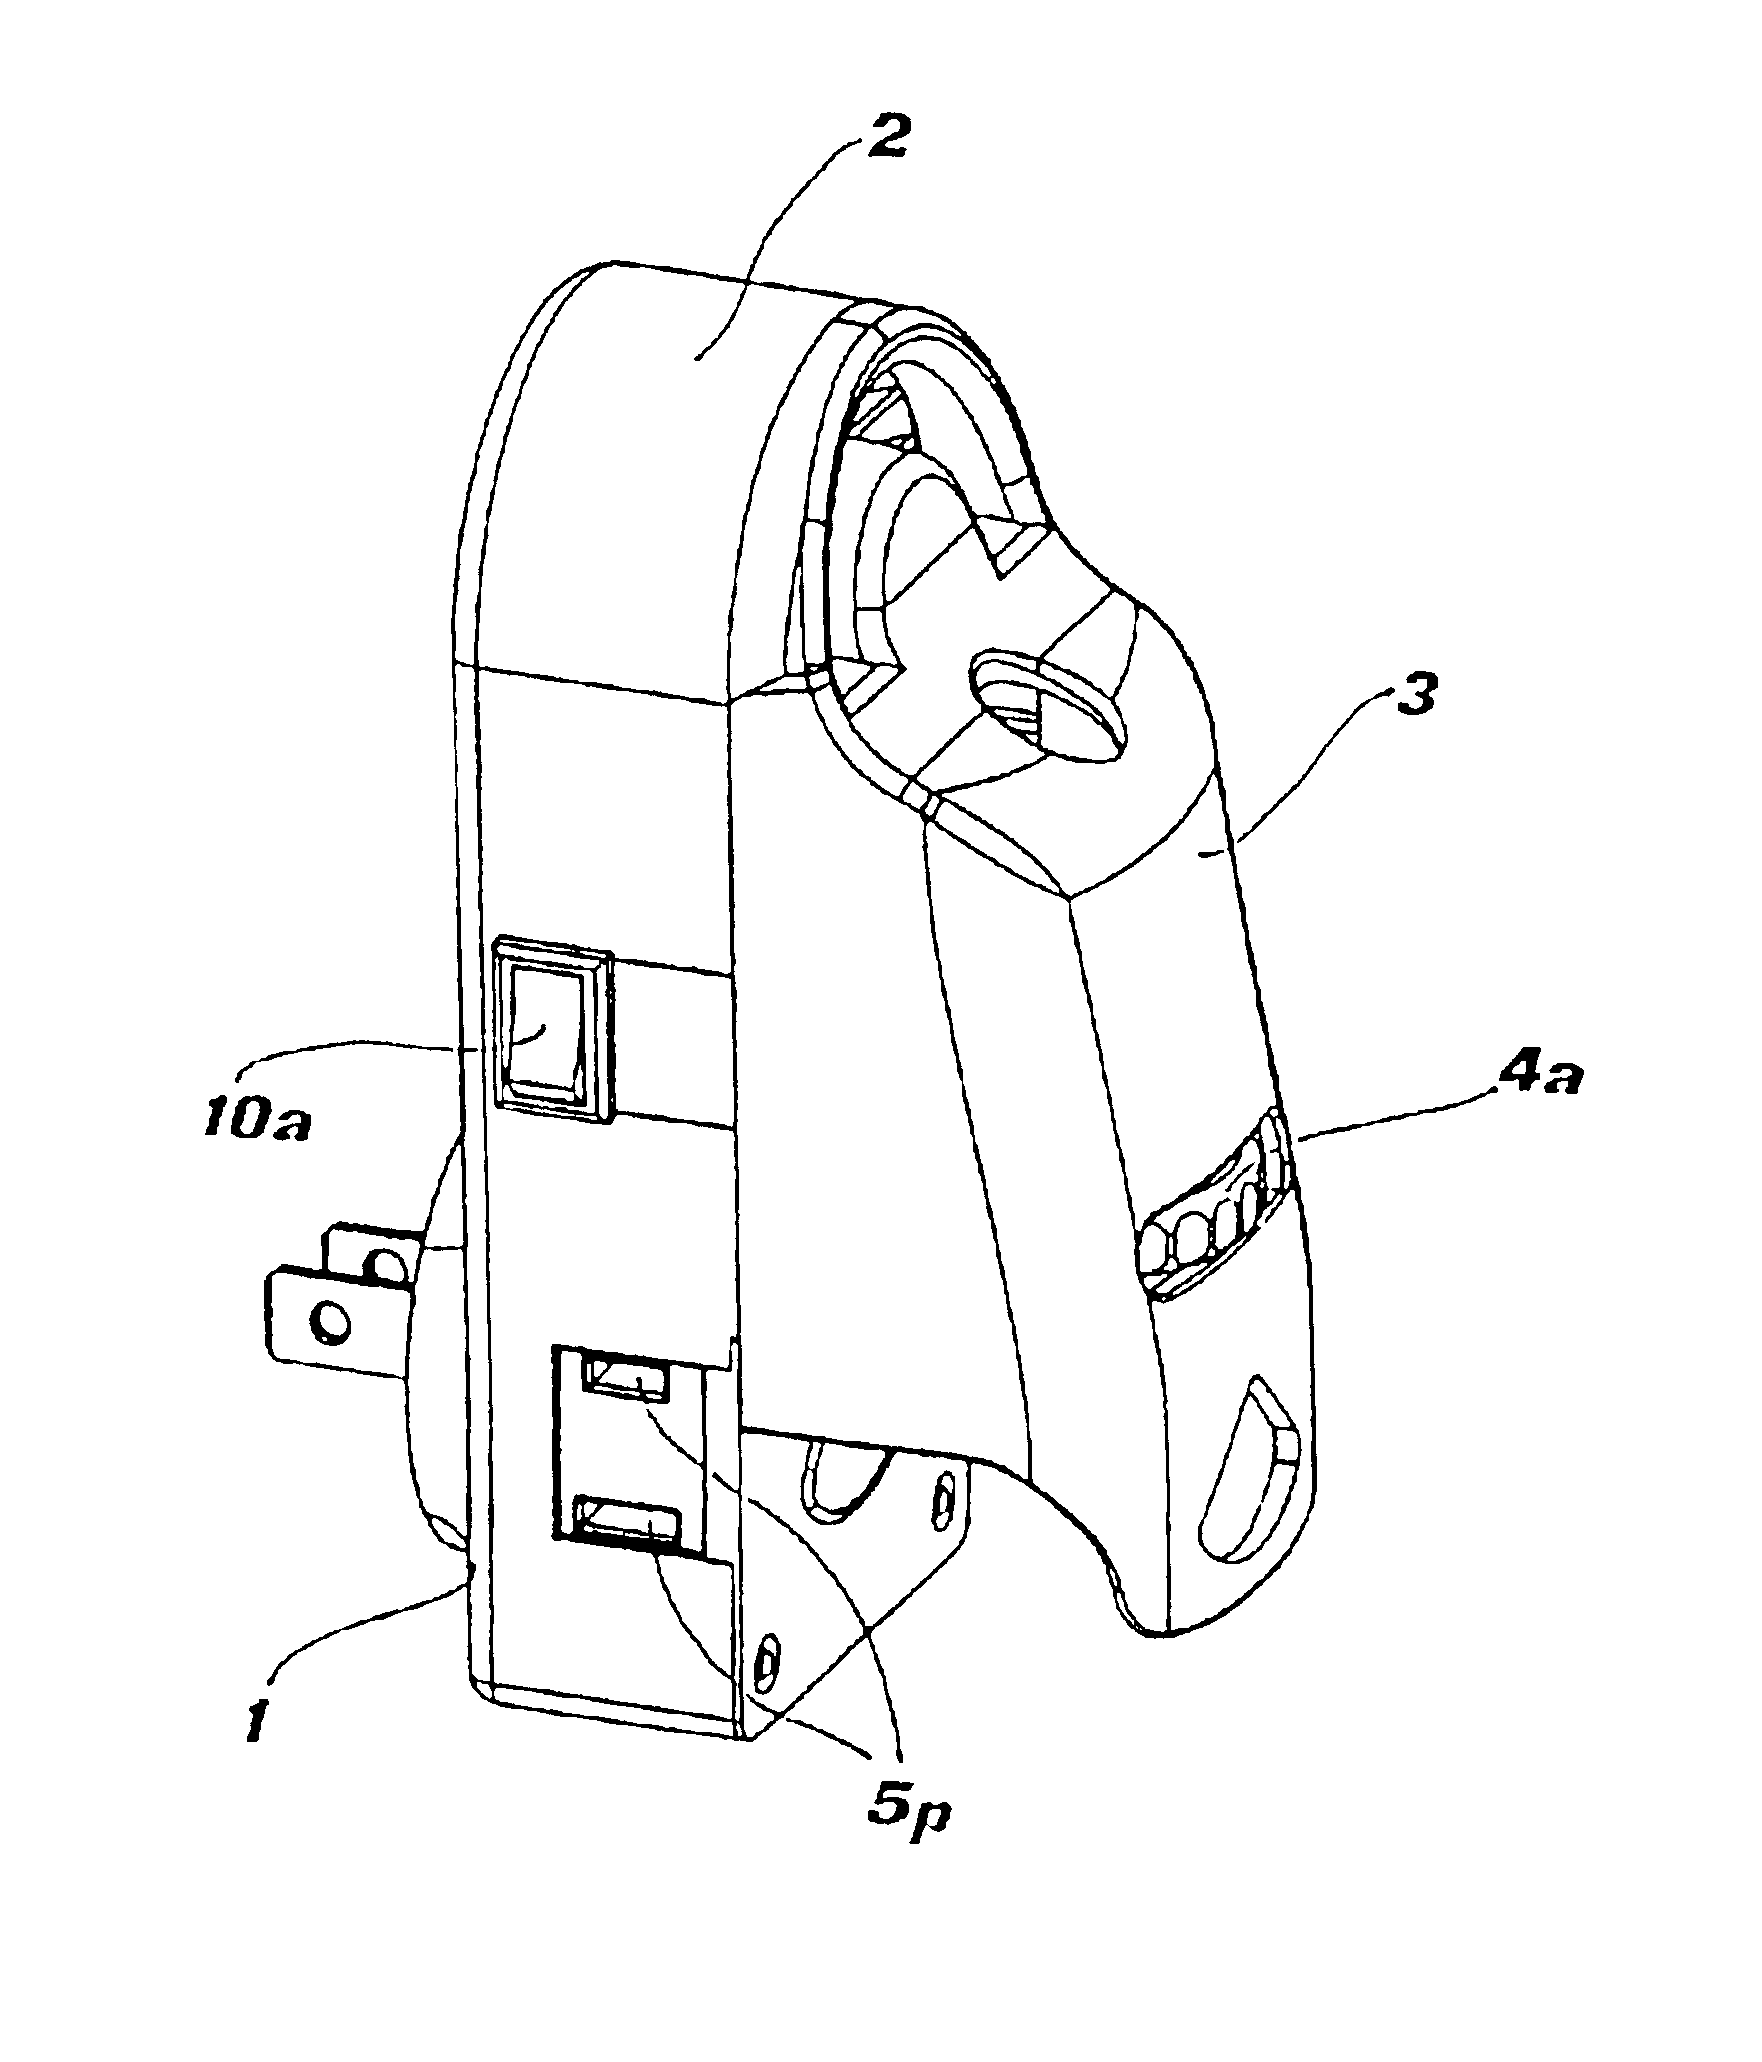 Multi-functional electrical vaporizer for a liquid substance and method of manufacturing such a vaporizer